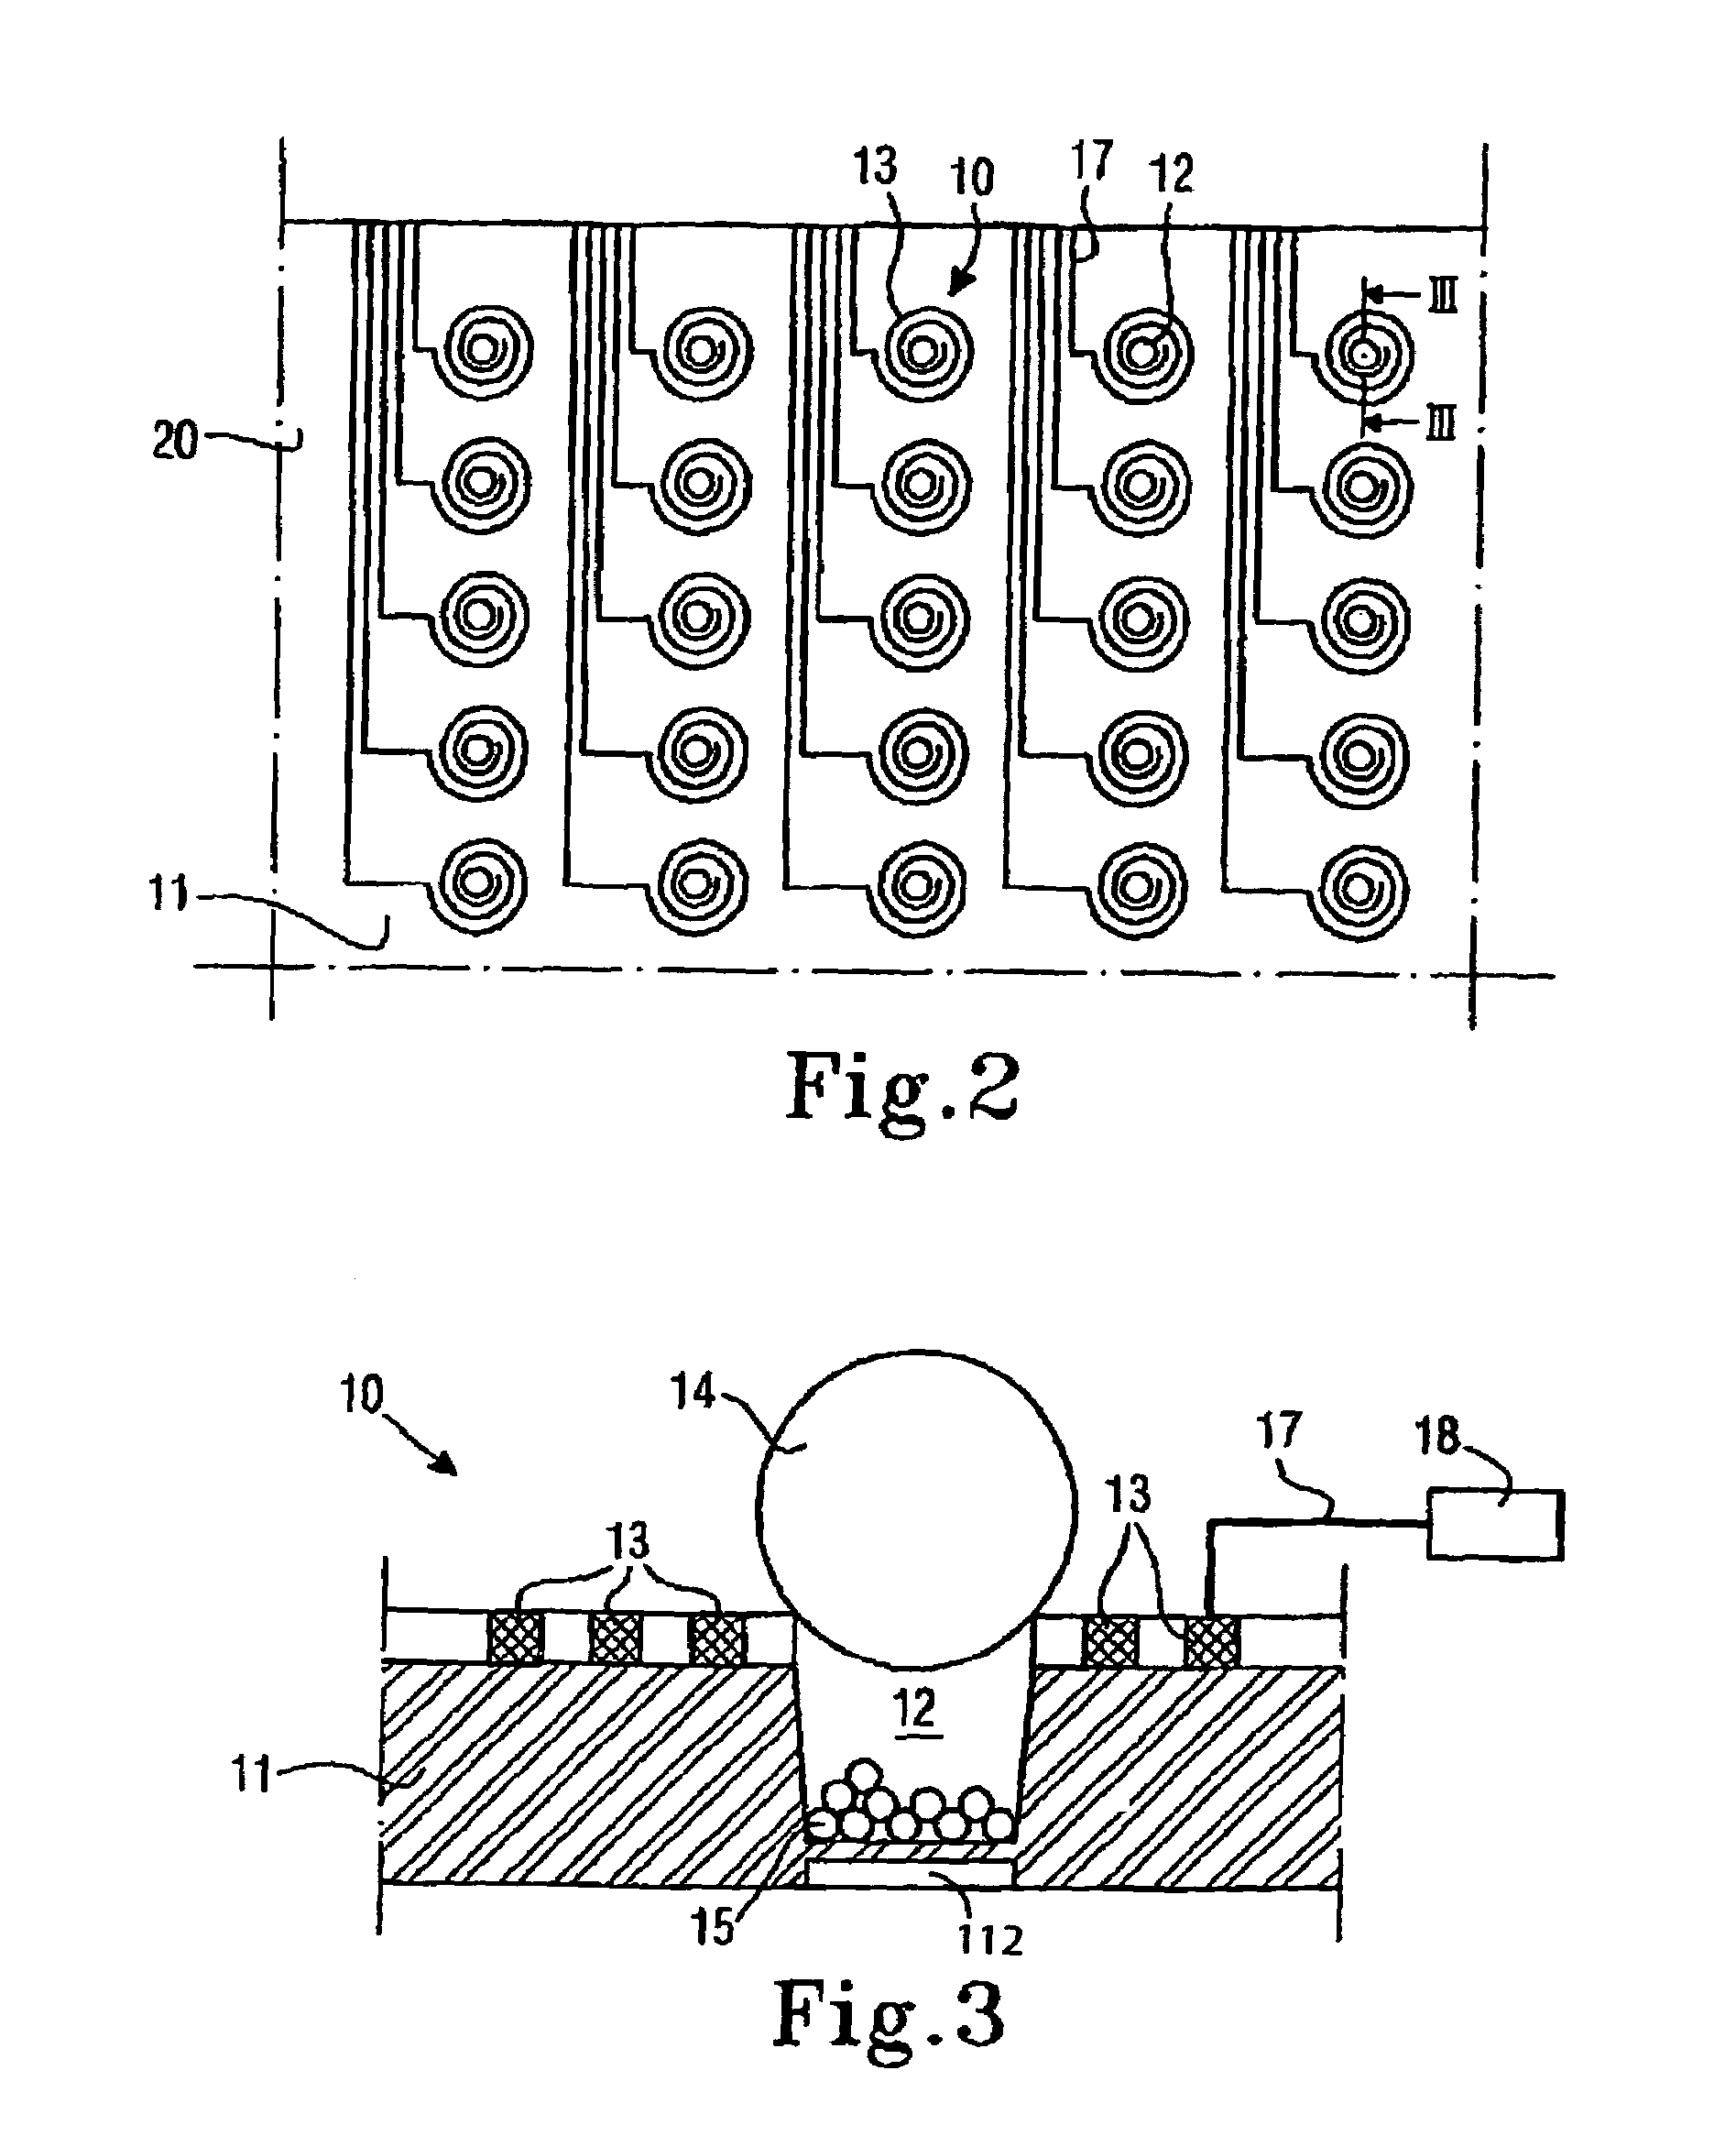 Microfluidic device and method with trapping of sample in cavities having lids that can be opened or closed